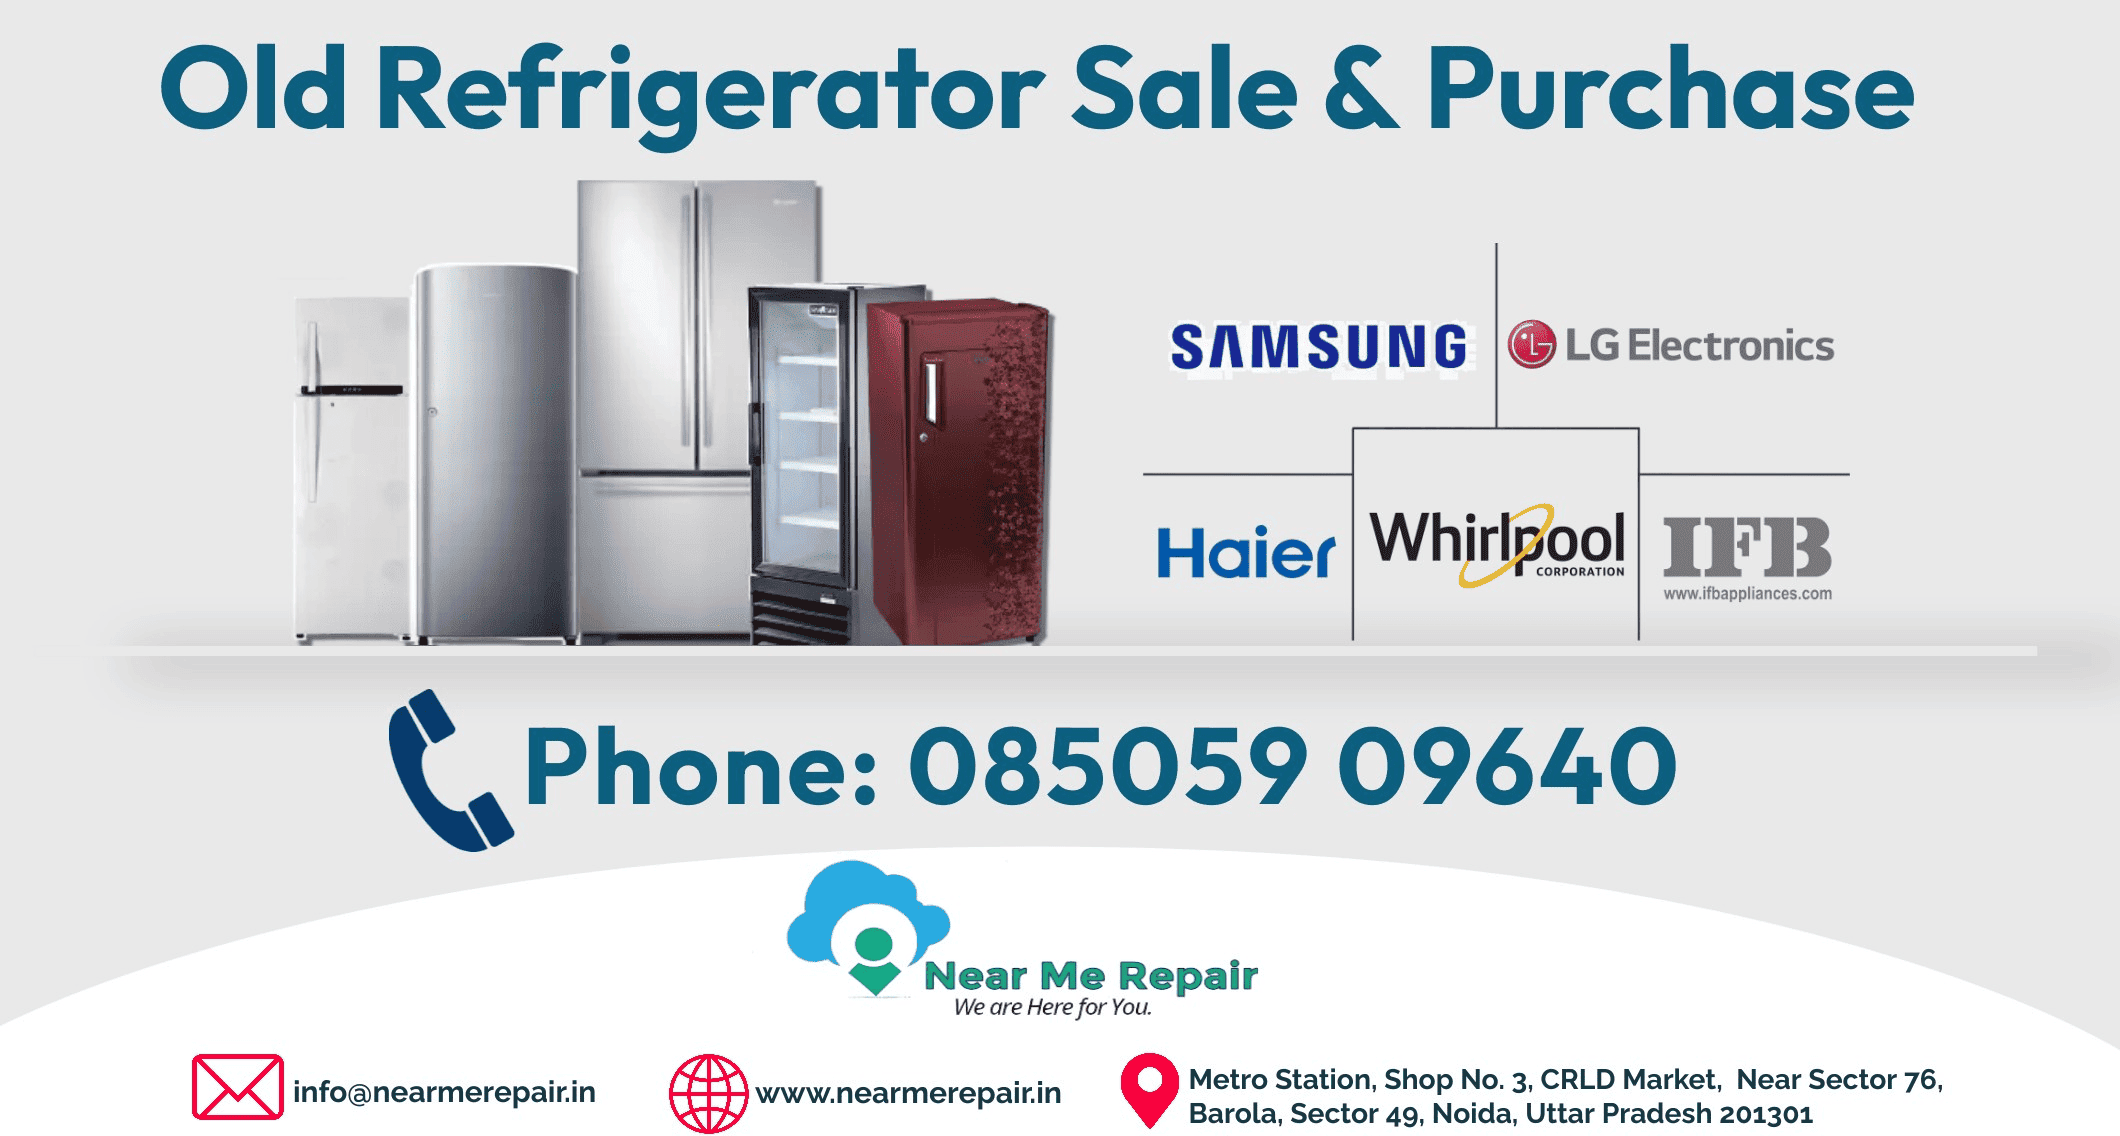 Explore hassle-free transactions for buying and selling pre-owned refrigerators and fridges in the Delhi-NCR region.